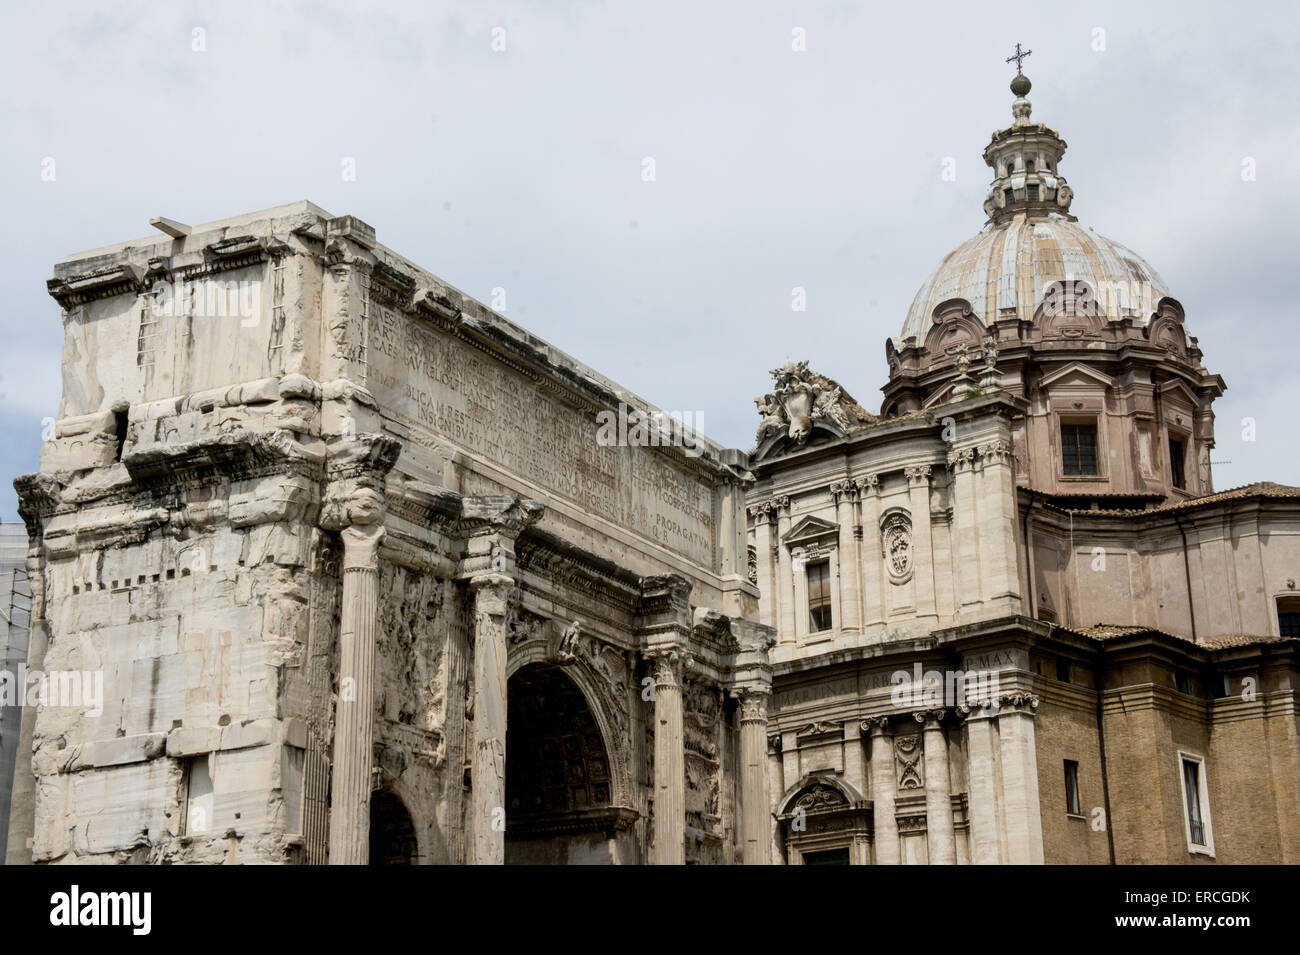 White marble Arch of Septimius Severus on the left and the Santi Luca e Martina church on the right background at the Roman forum. Stock Photo